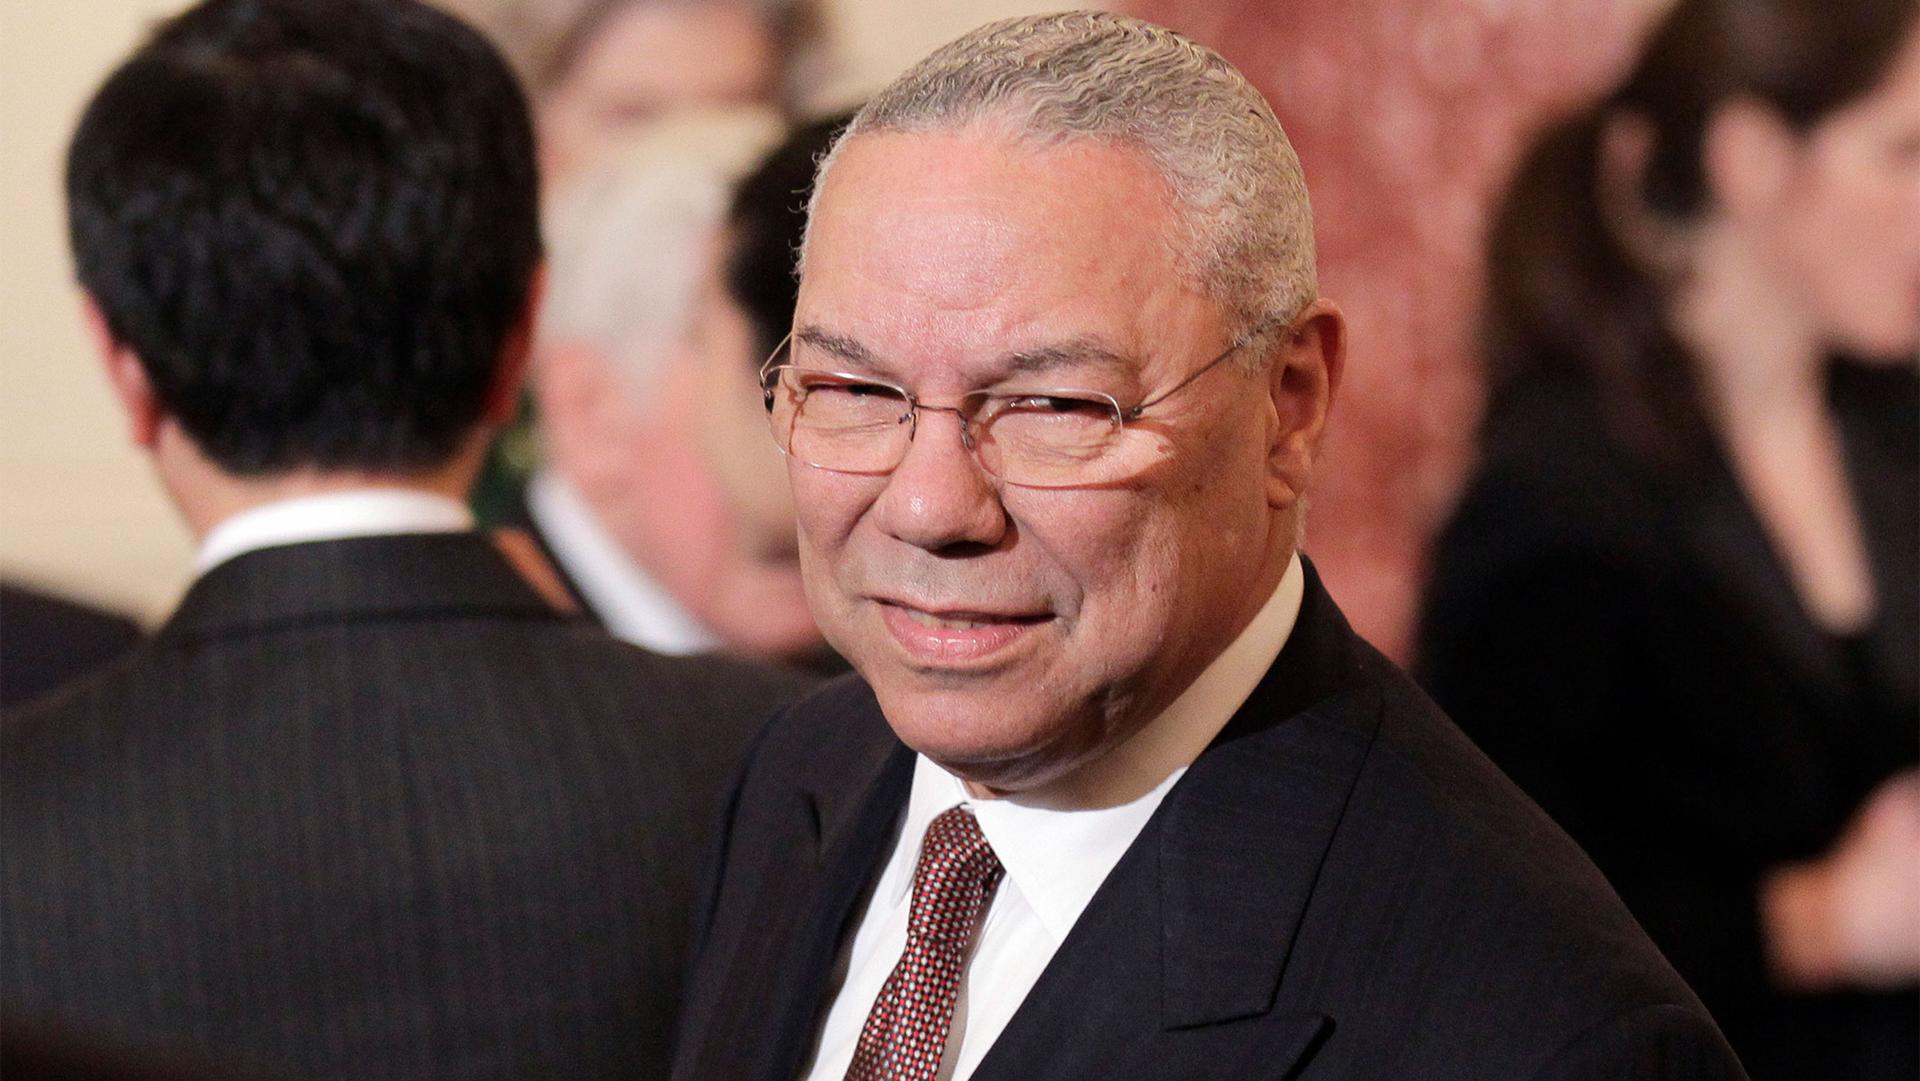 Former Secretary of State Colin Powell is seen at the State Department in Washington